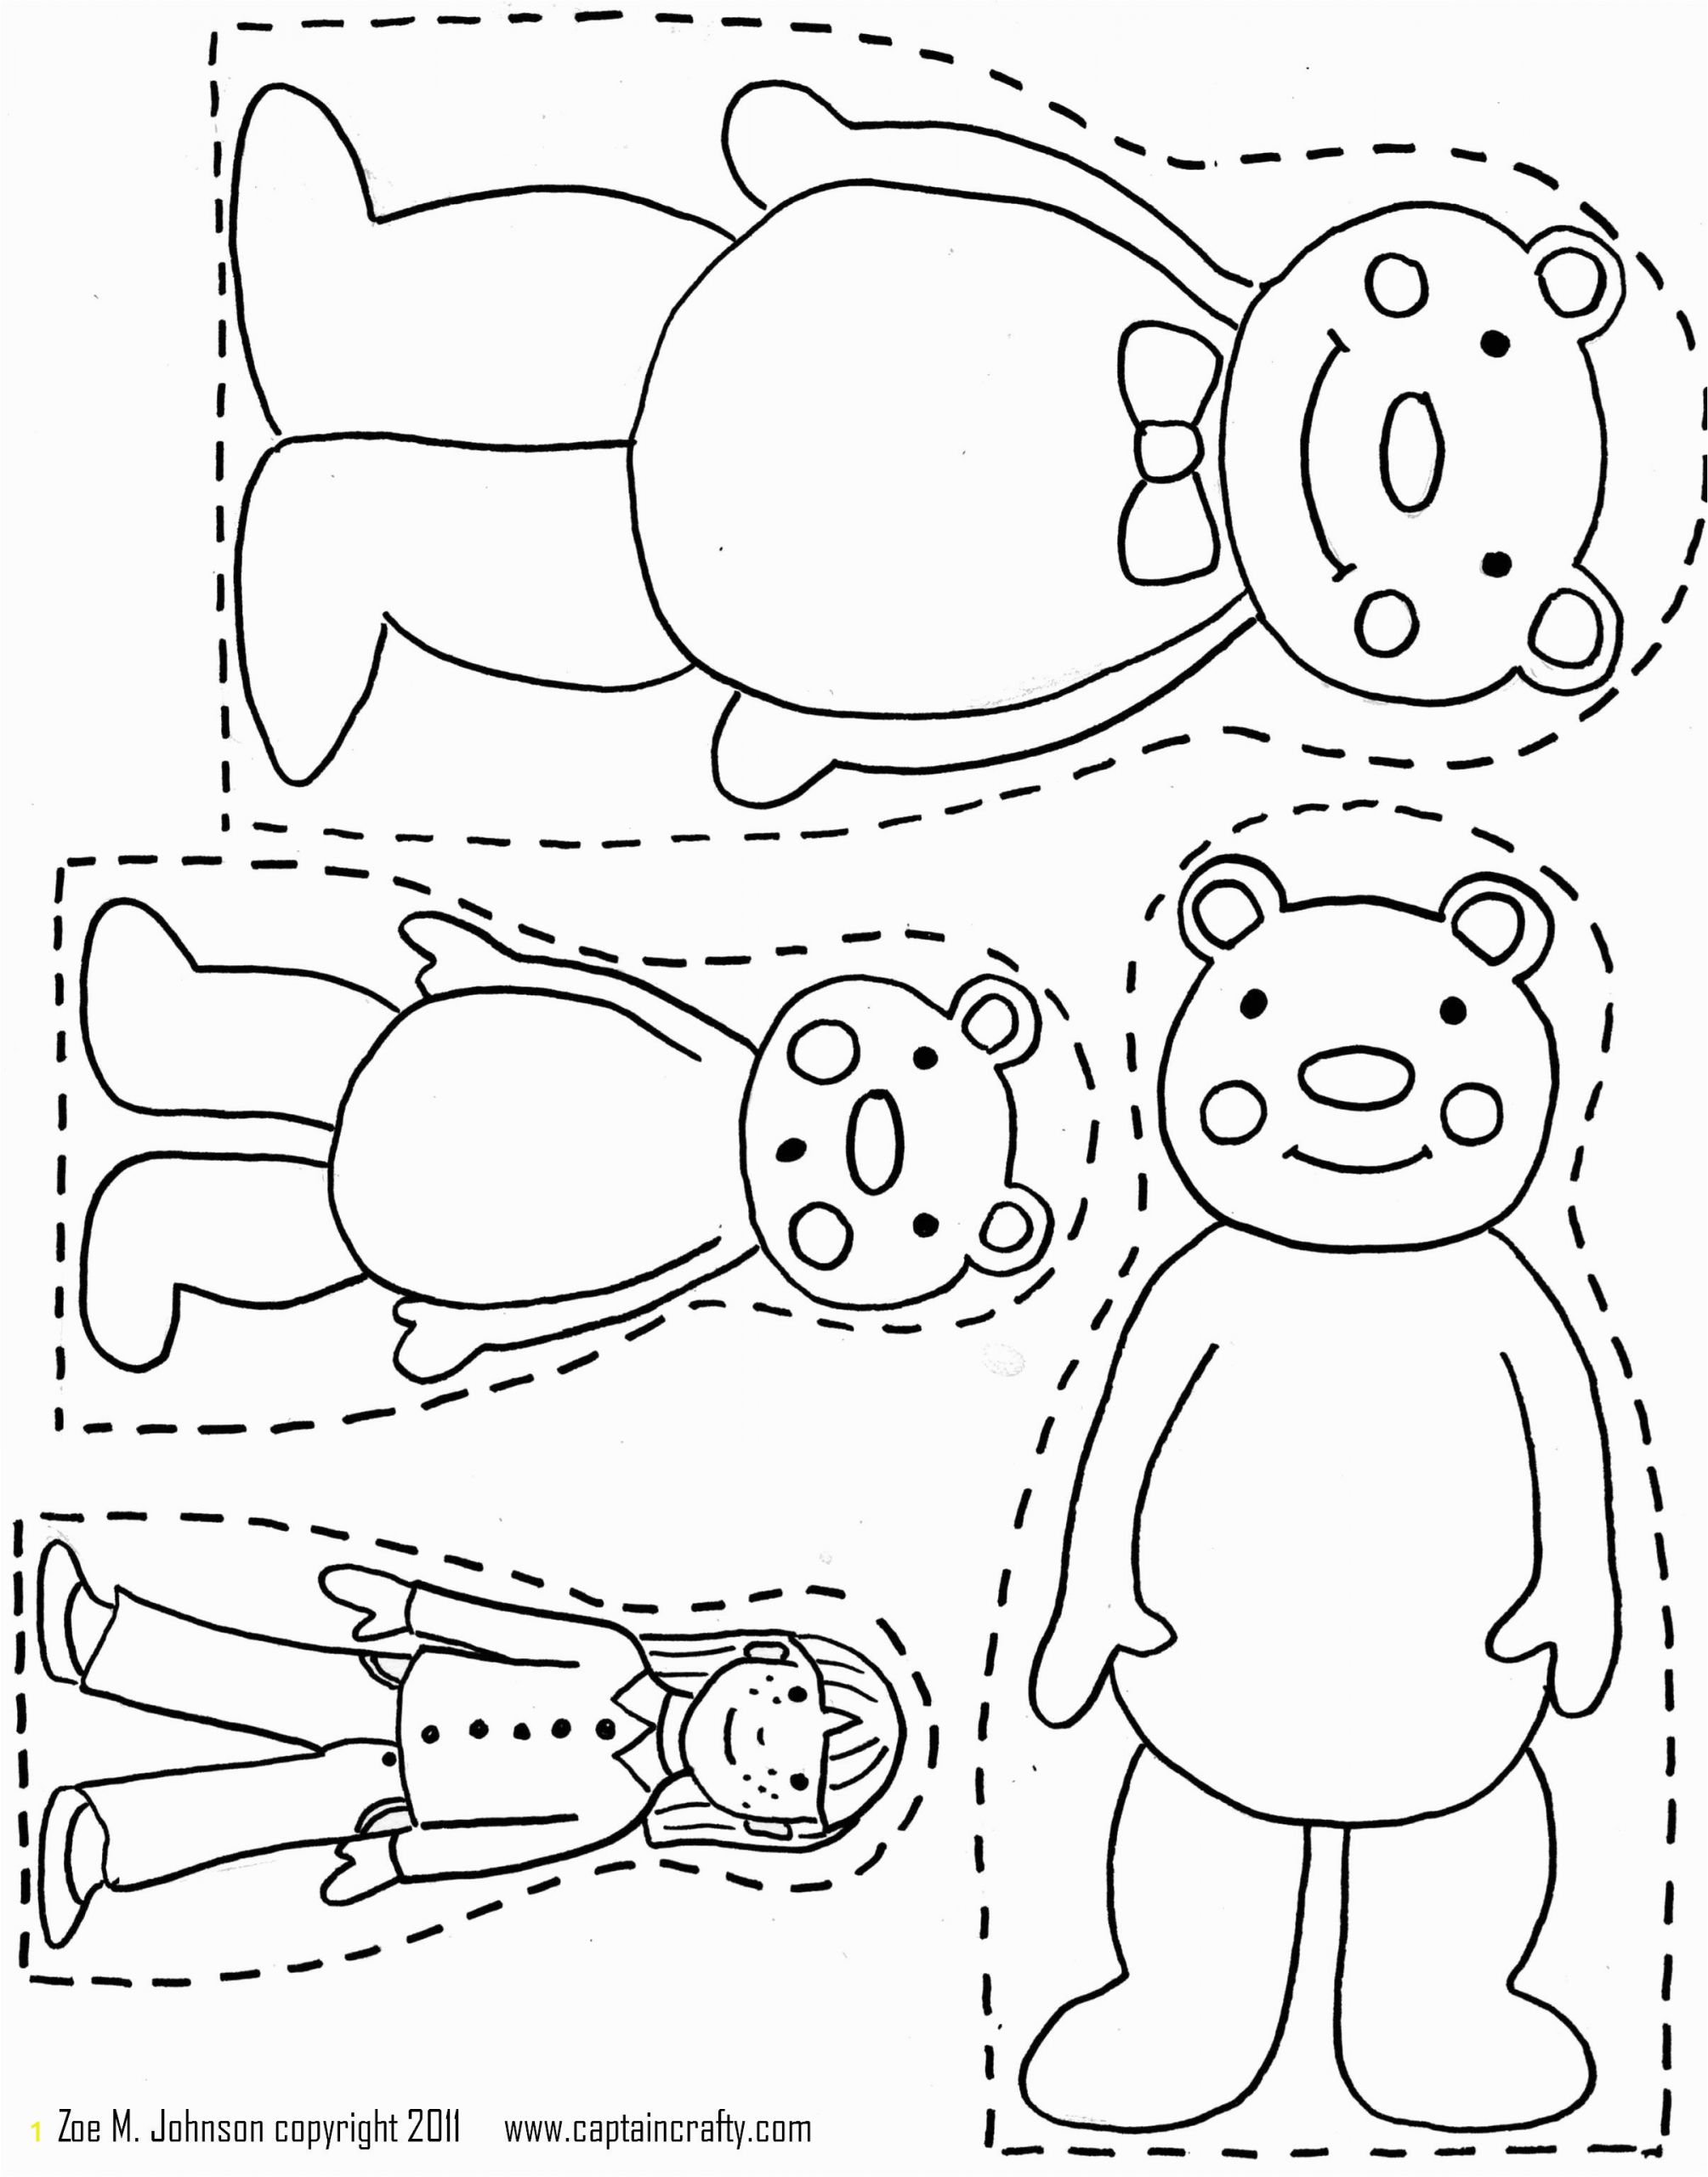 Goldilocks and the Three Bears Coloring Pages Preschool Printables Archive the Handmade Adventures Of Captain